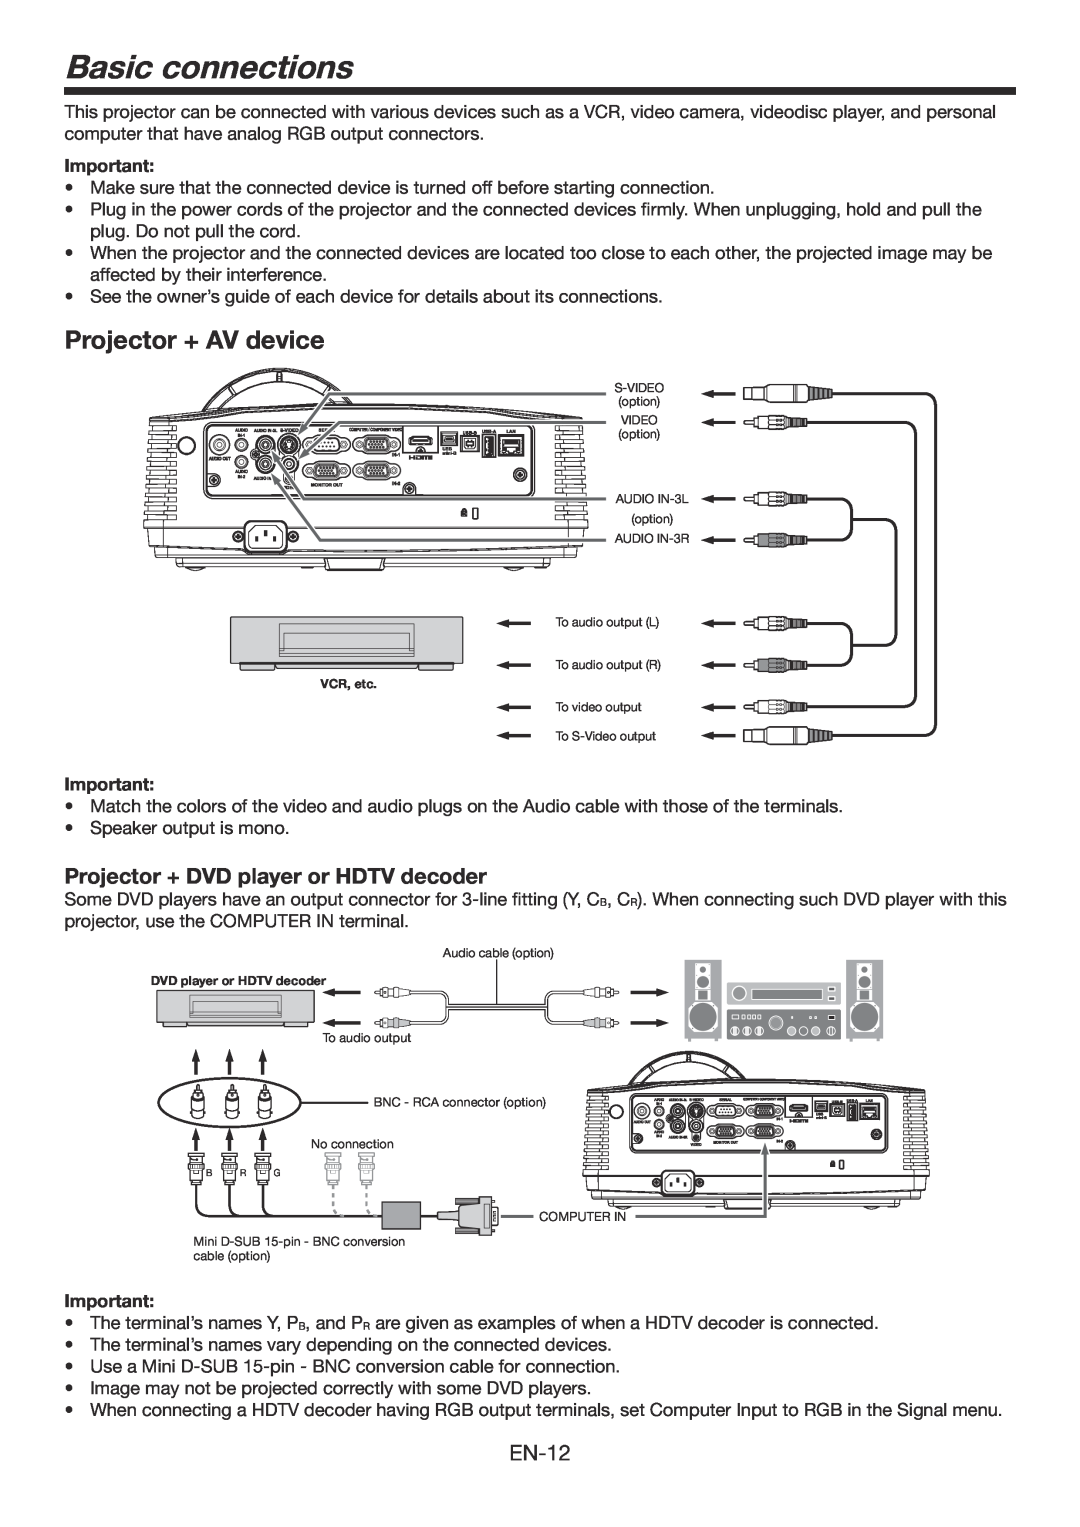 Mitsubishi Electronics WD385U-EST Basic connections, Projector + AV device, Projector + DVD player or HDTV decoder 